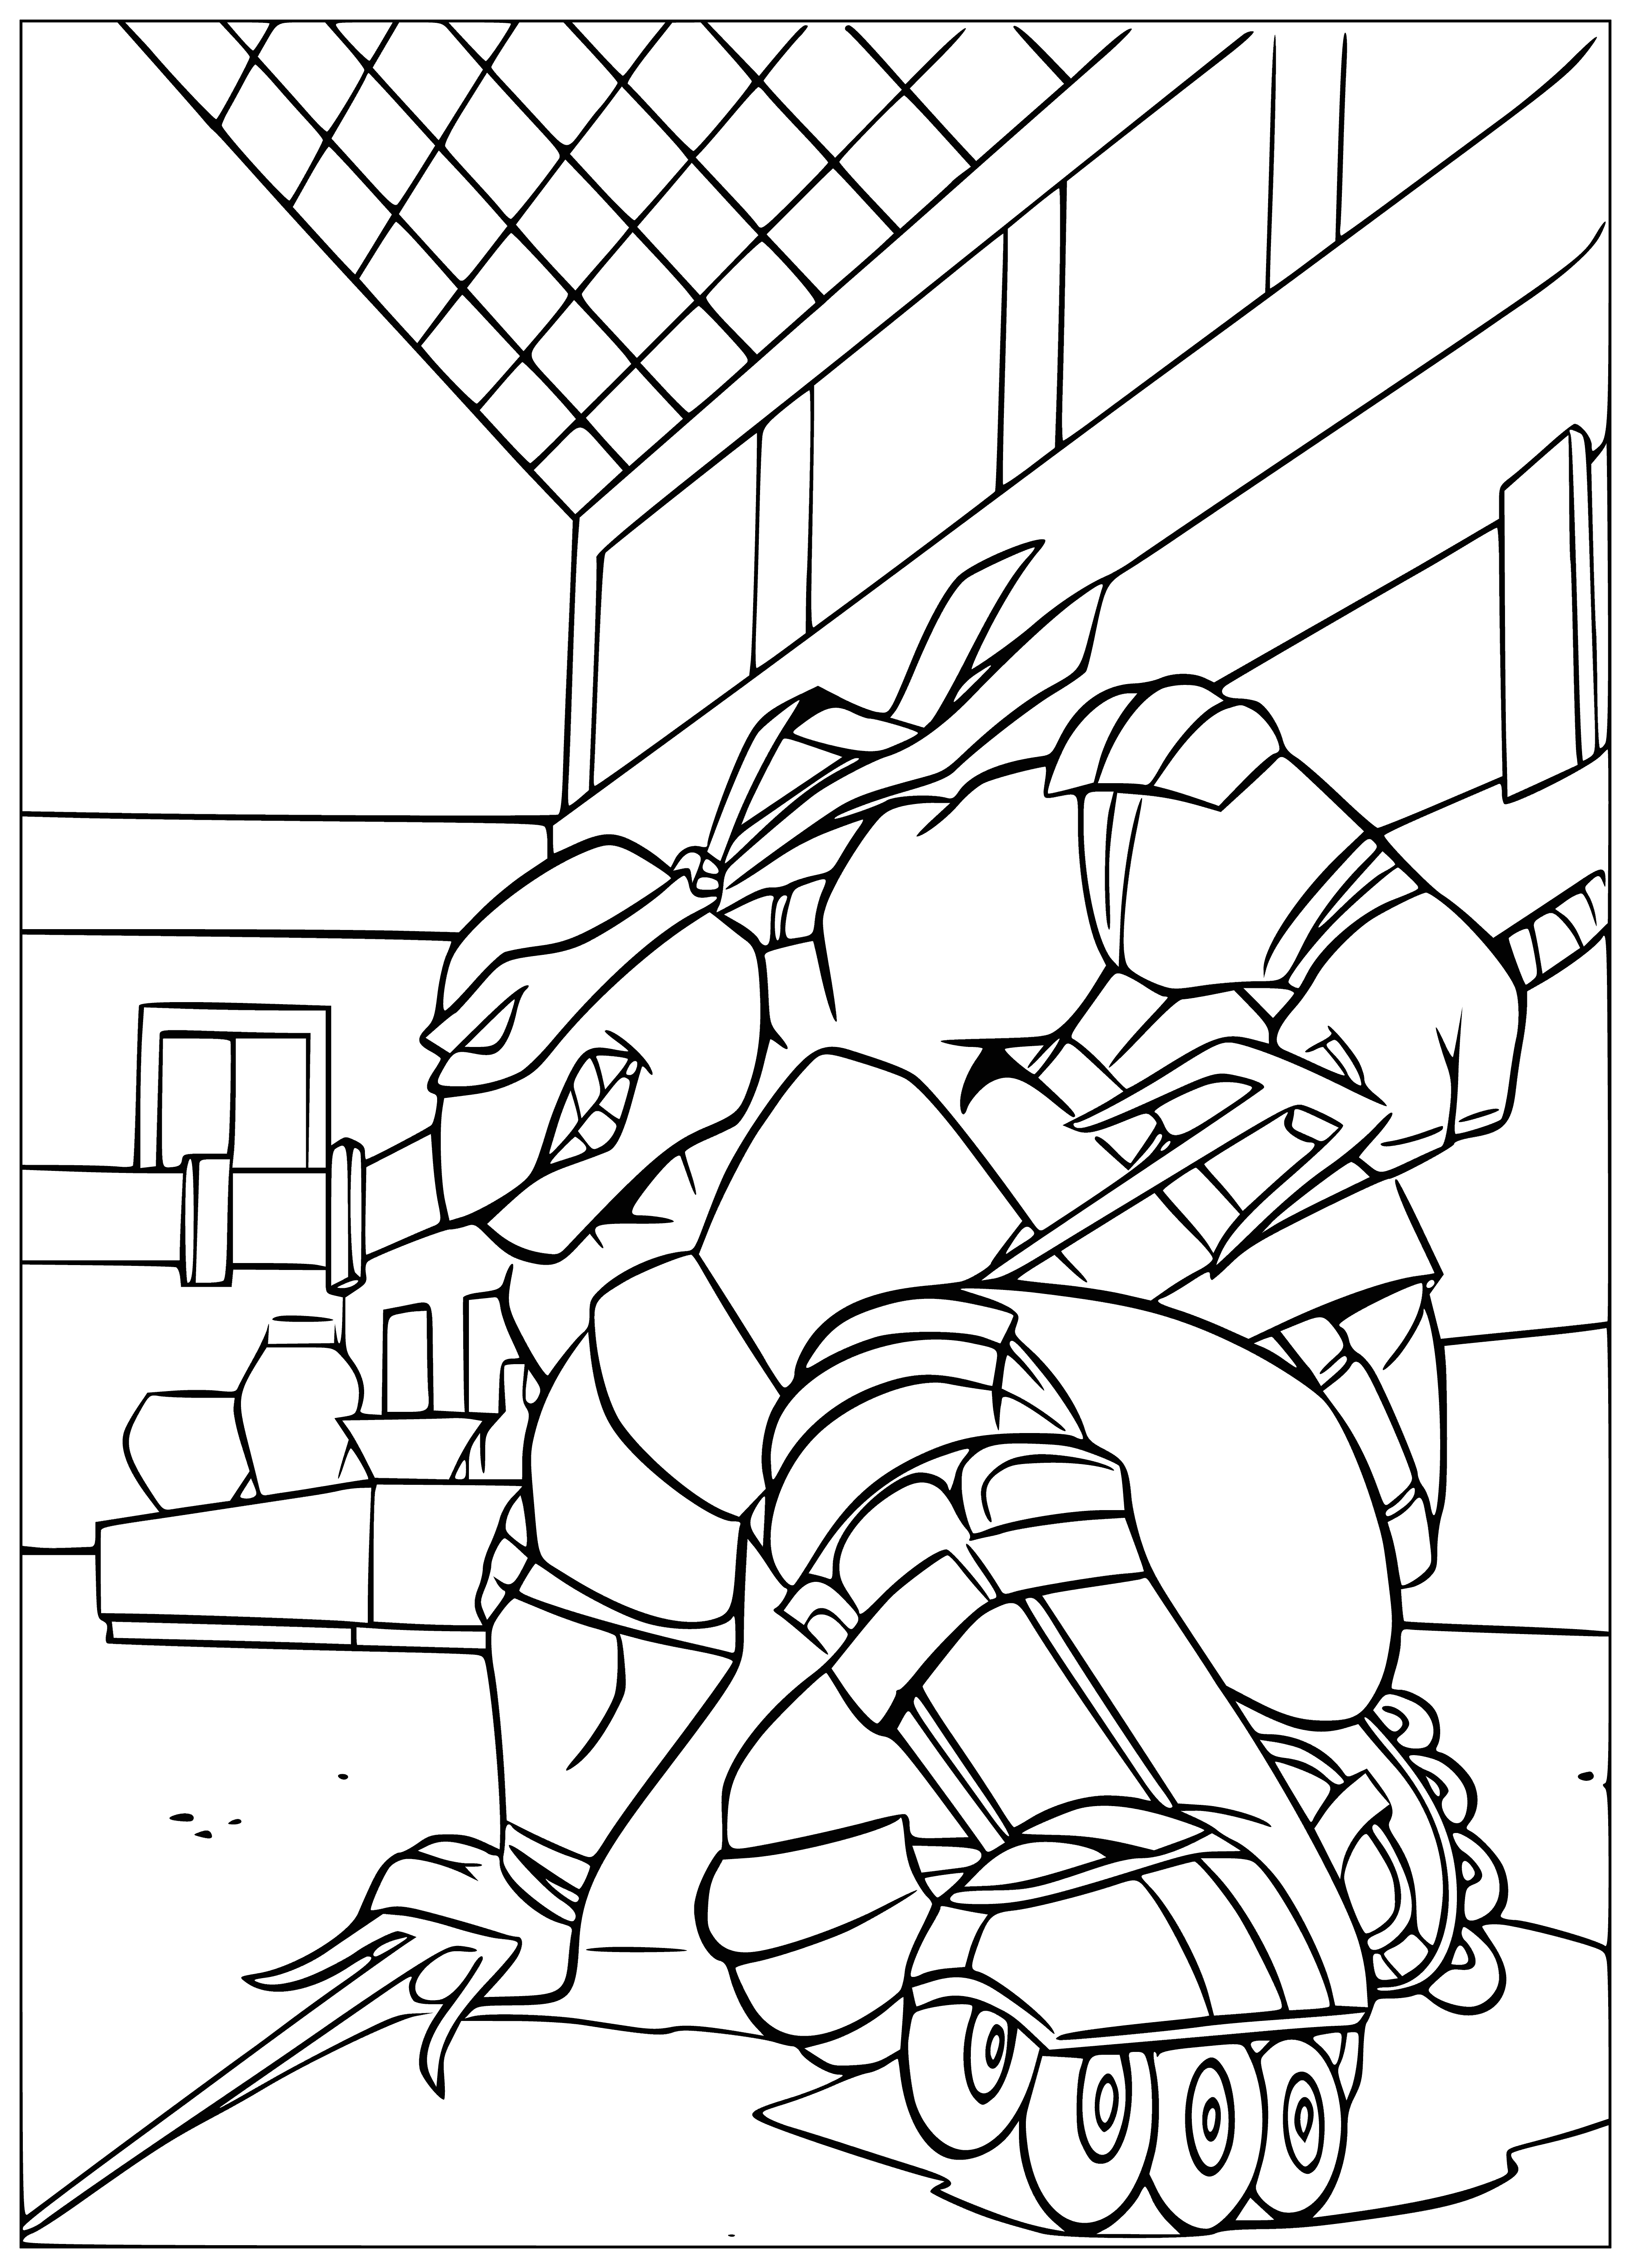 coloring page: Raphael skates across a parking lot on rollers, hands behind back and legs crossed. #coloringpage #ninjaturtles